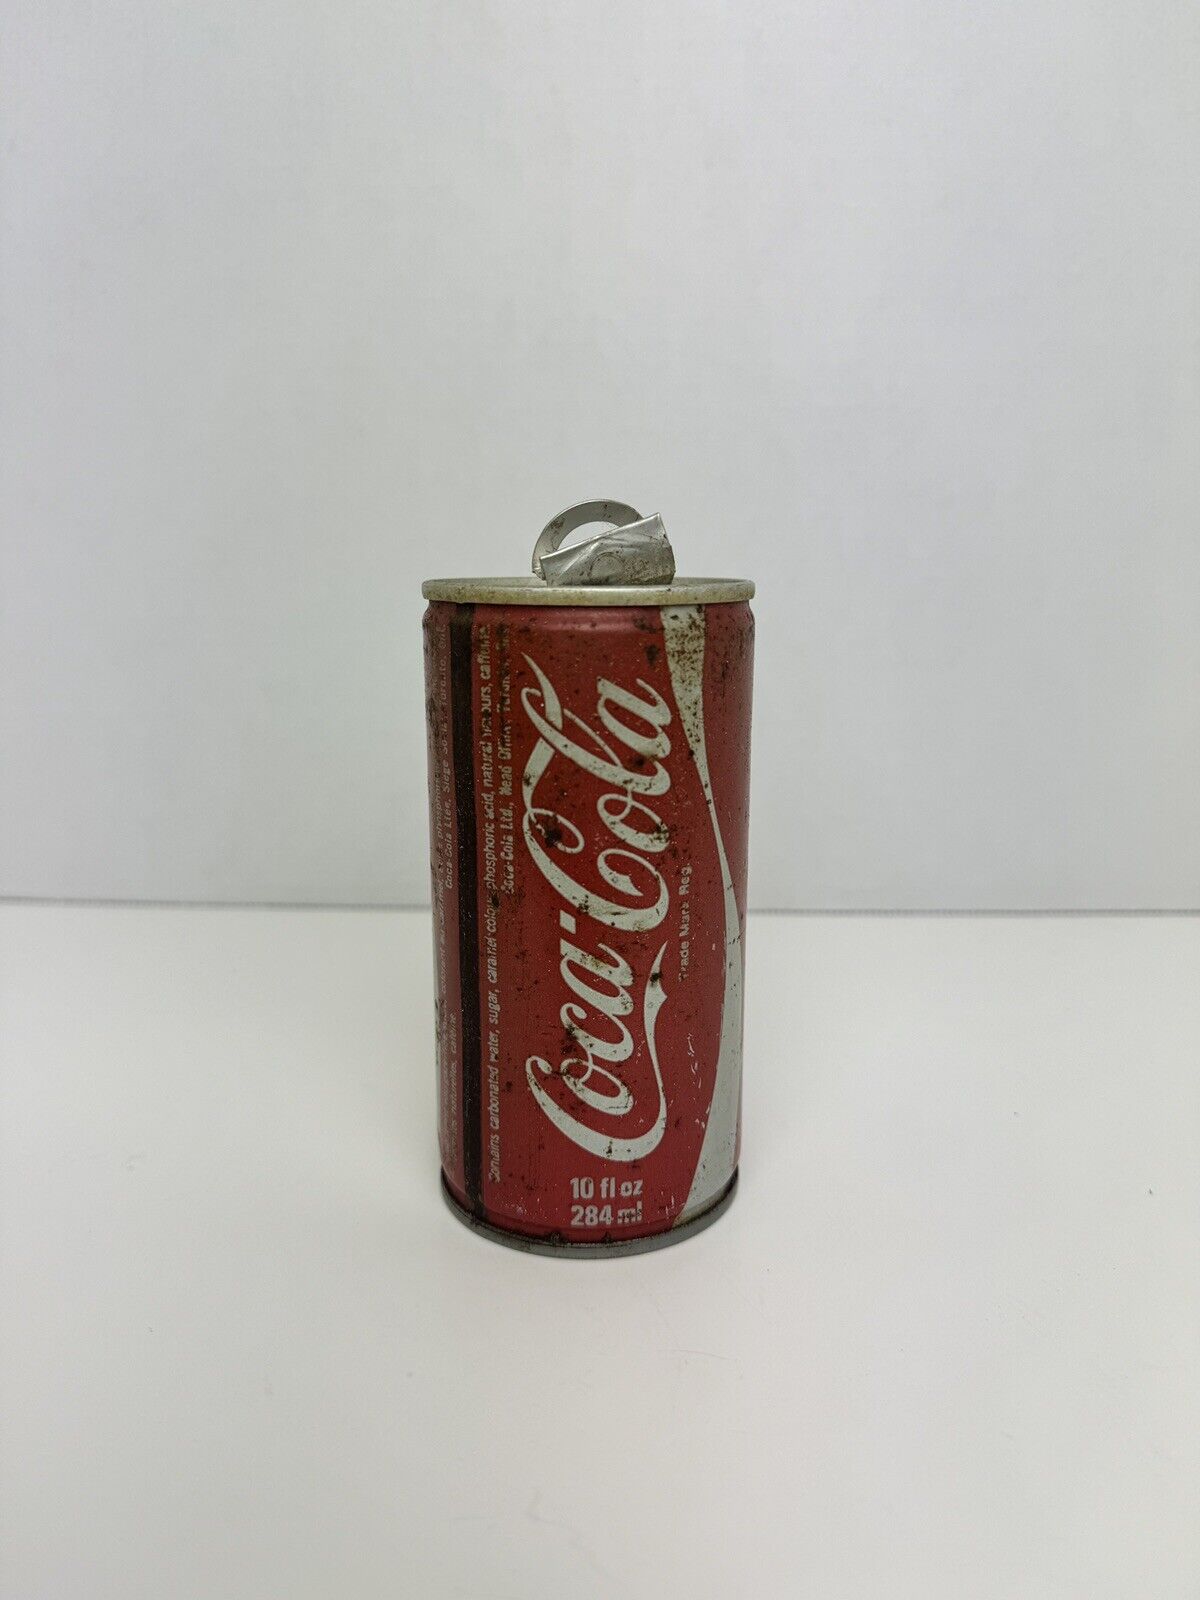 RARE 1975 French Canadian Coca Cola Can Sta- Tab (Patented By Daniel Cudzik)